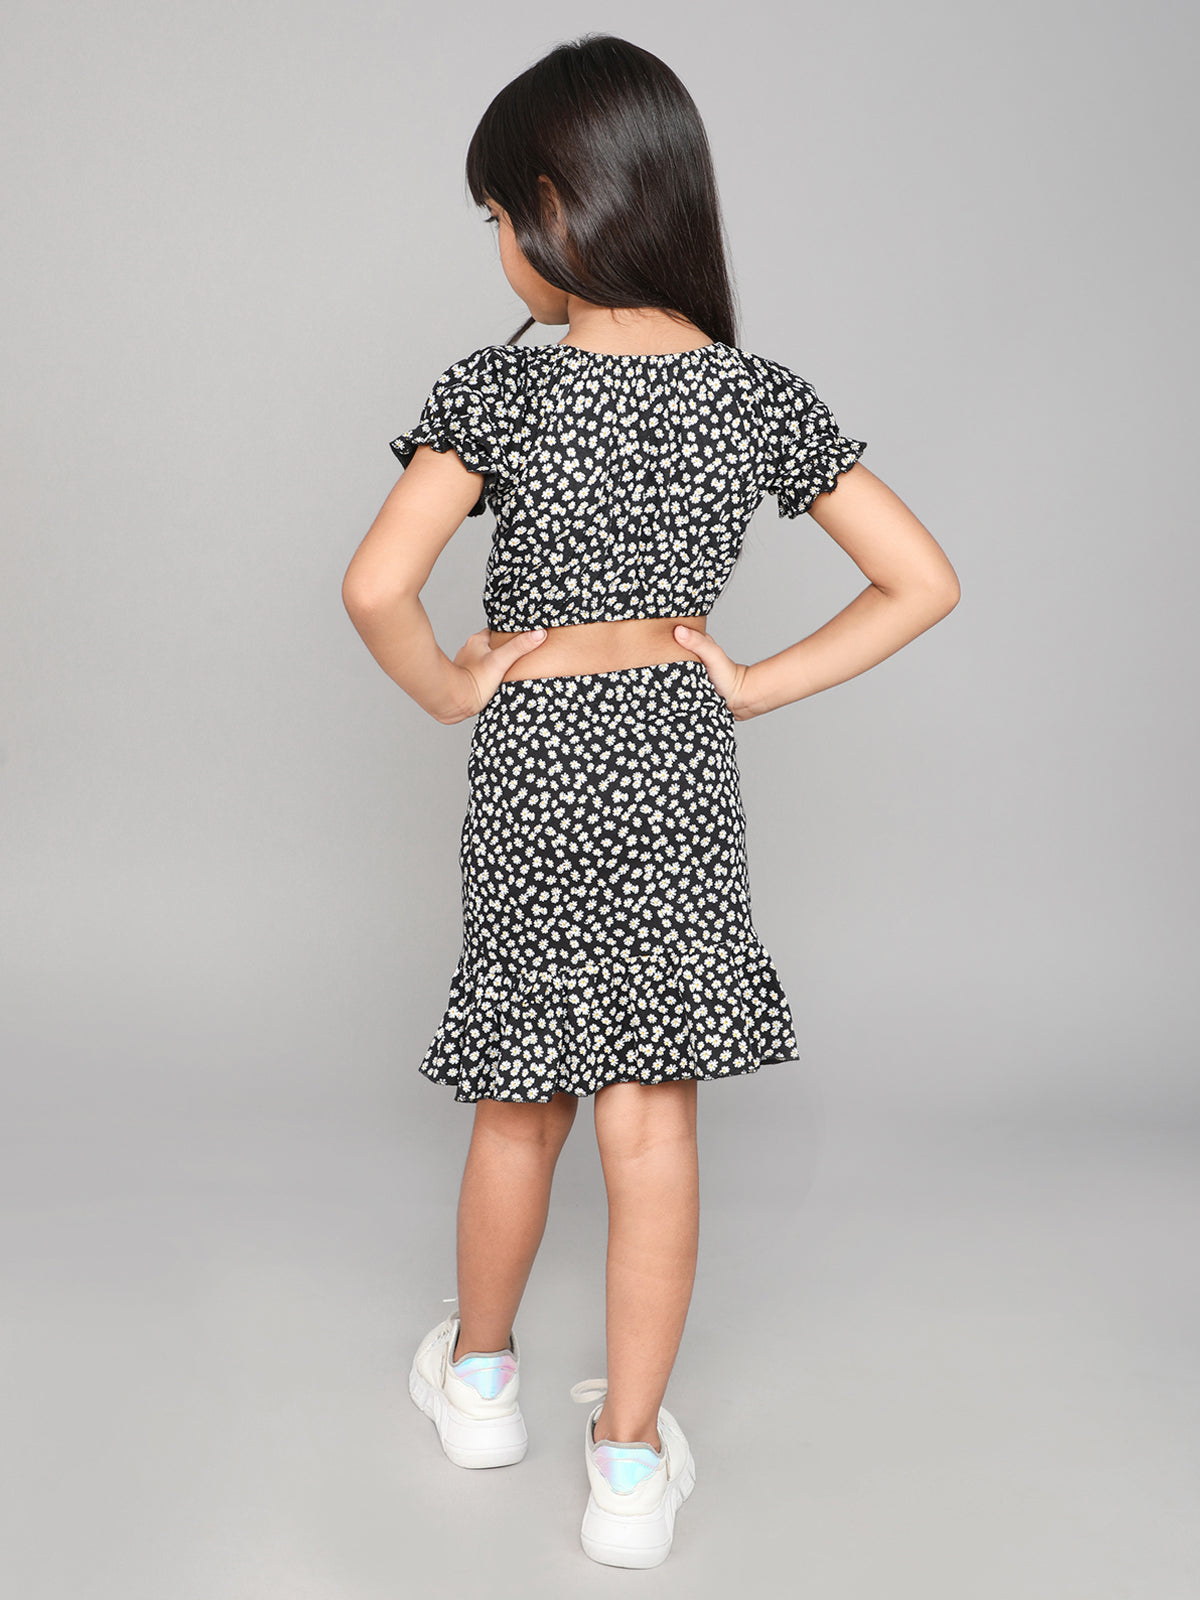 Daisy Printed Top & Skirt Sets for Girls